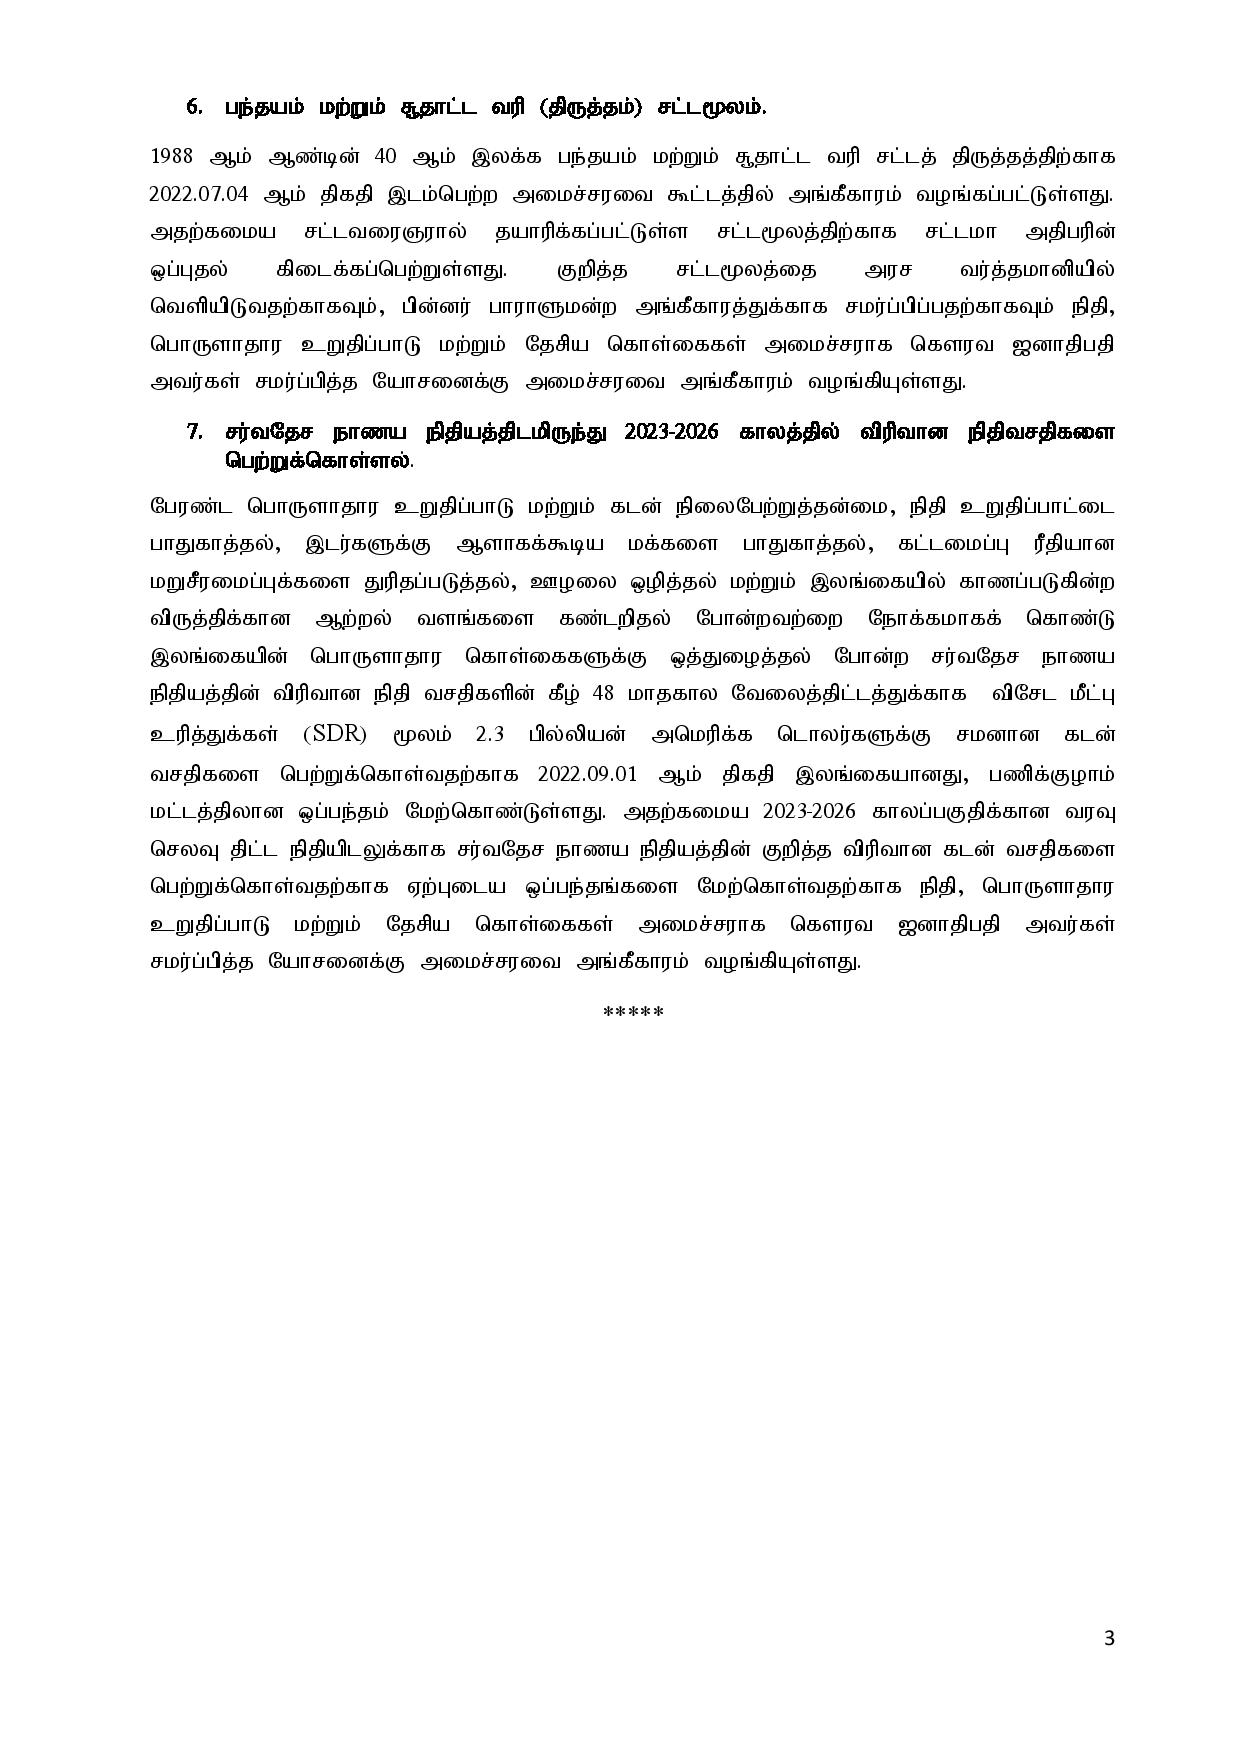 Cabinet Decisions on 20.03.2023 Tamil page 003